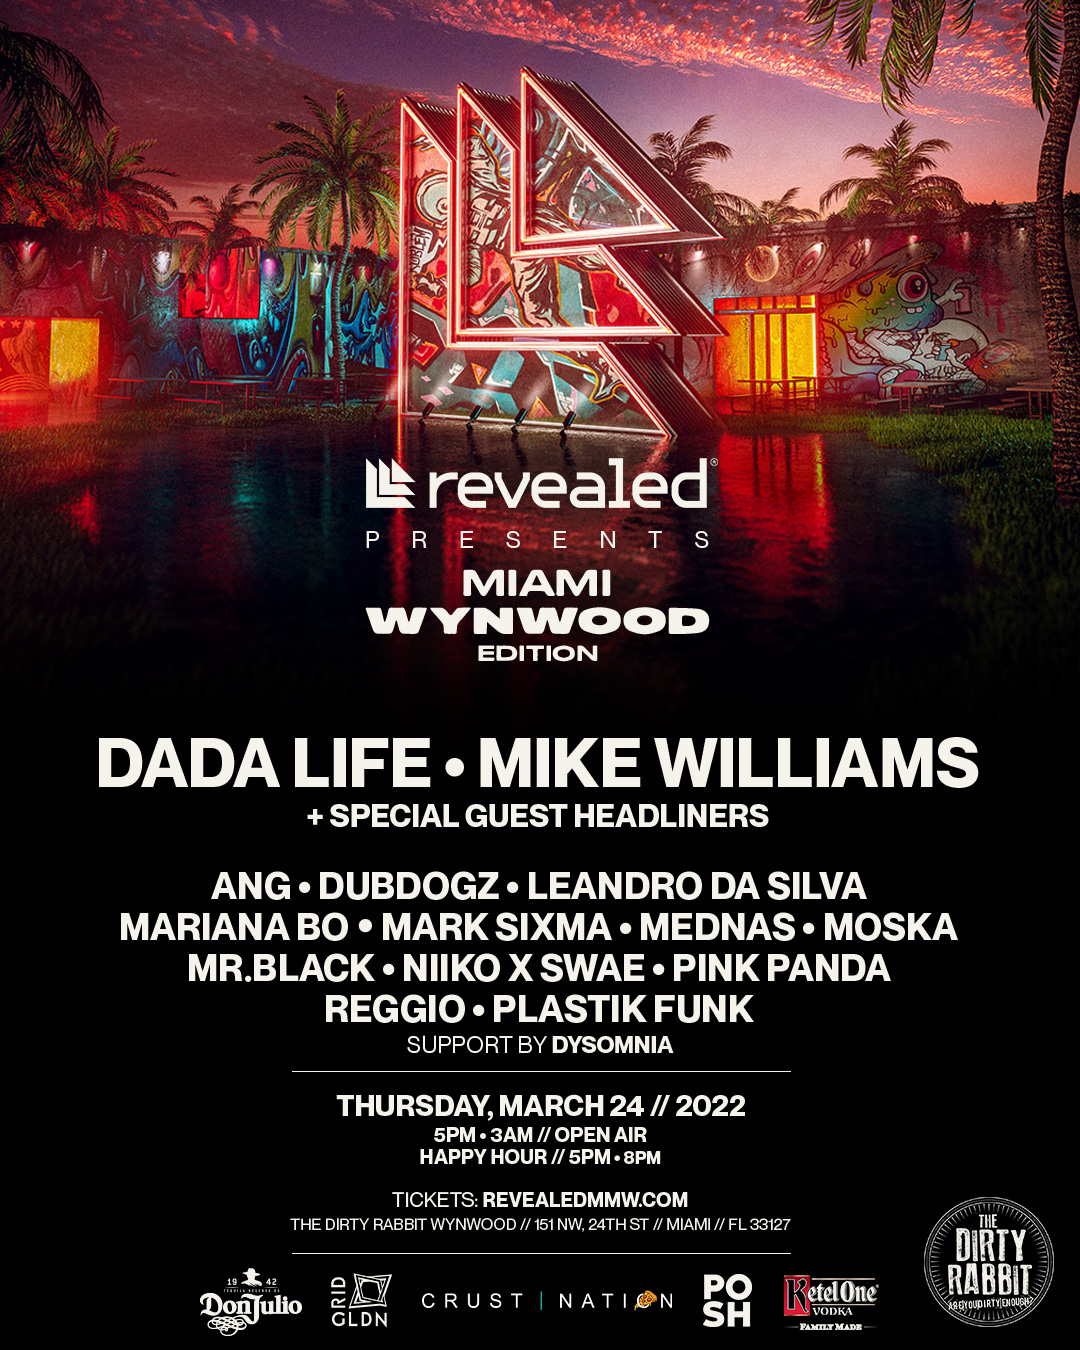 Revealed presents Miami Wynwood Open-Air Edition Image